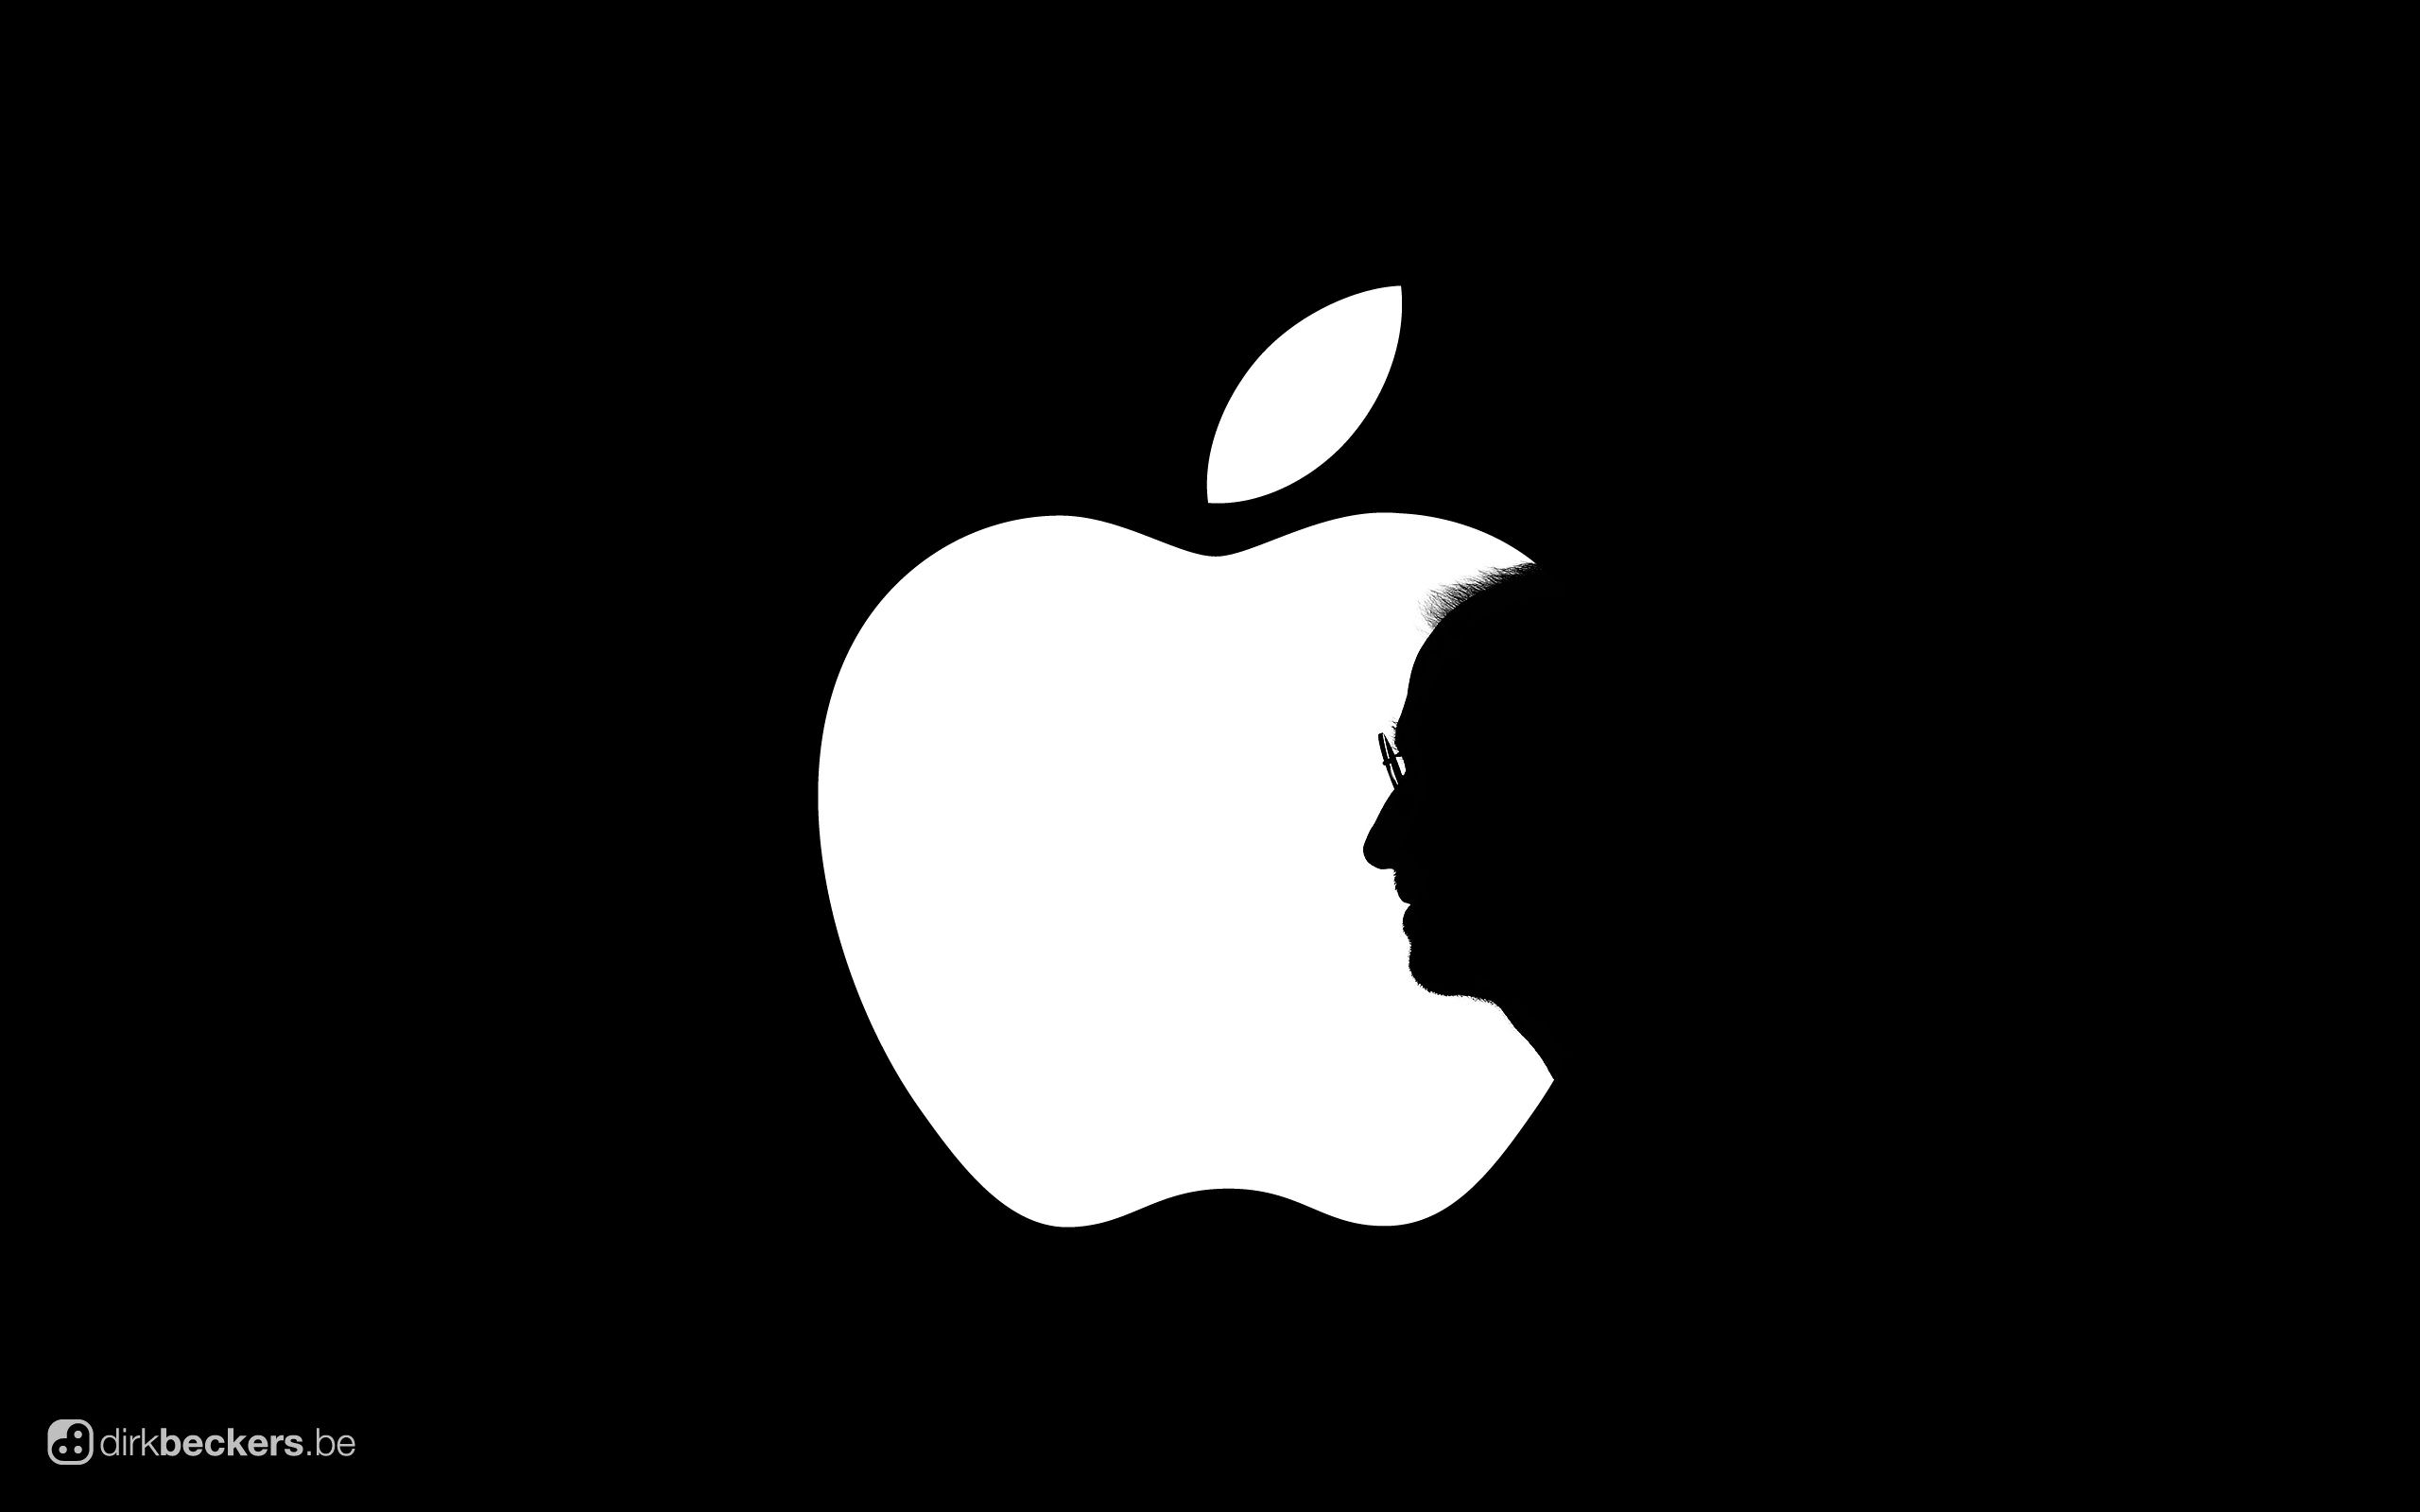 White Apple logo on black background with Steve Jobs profile cutting out the apple